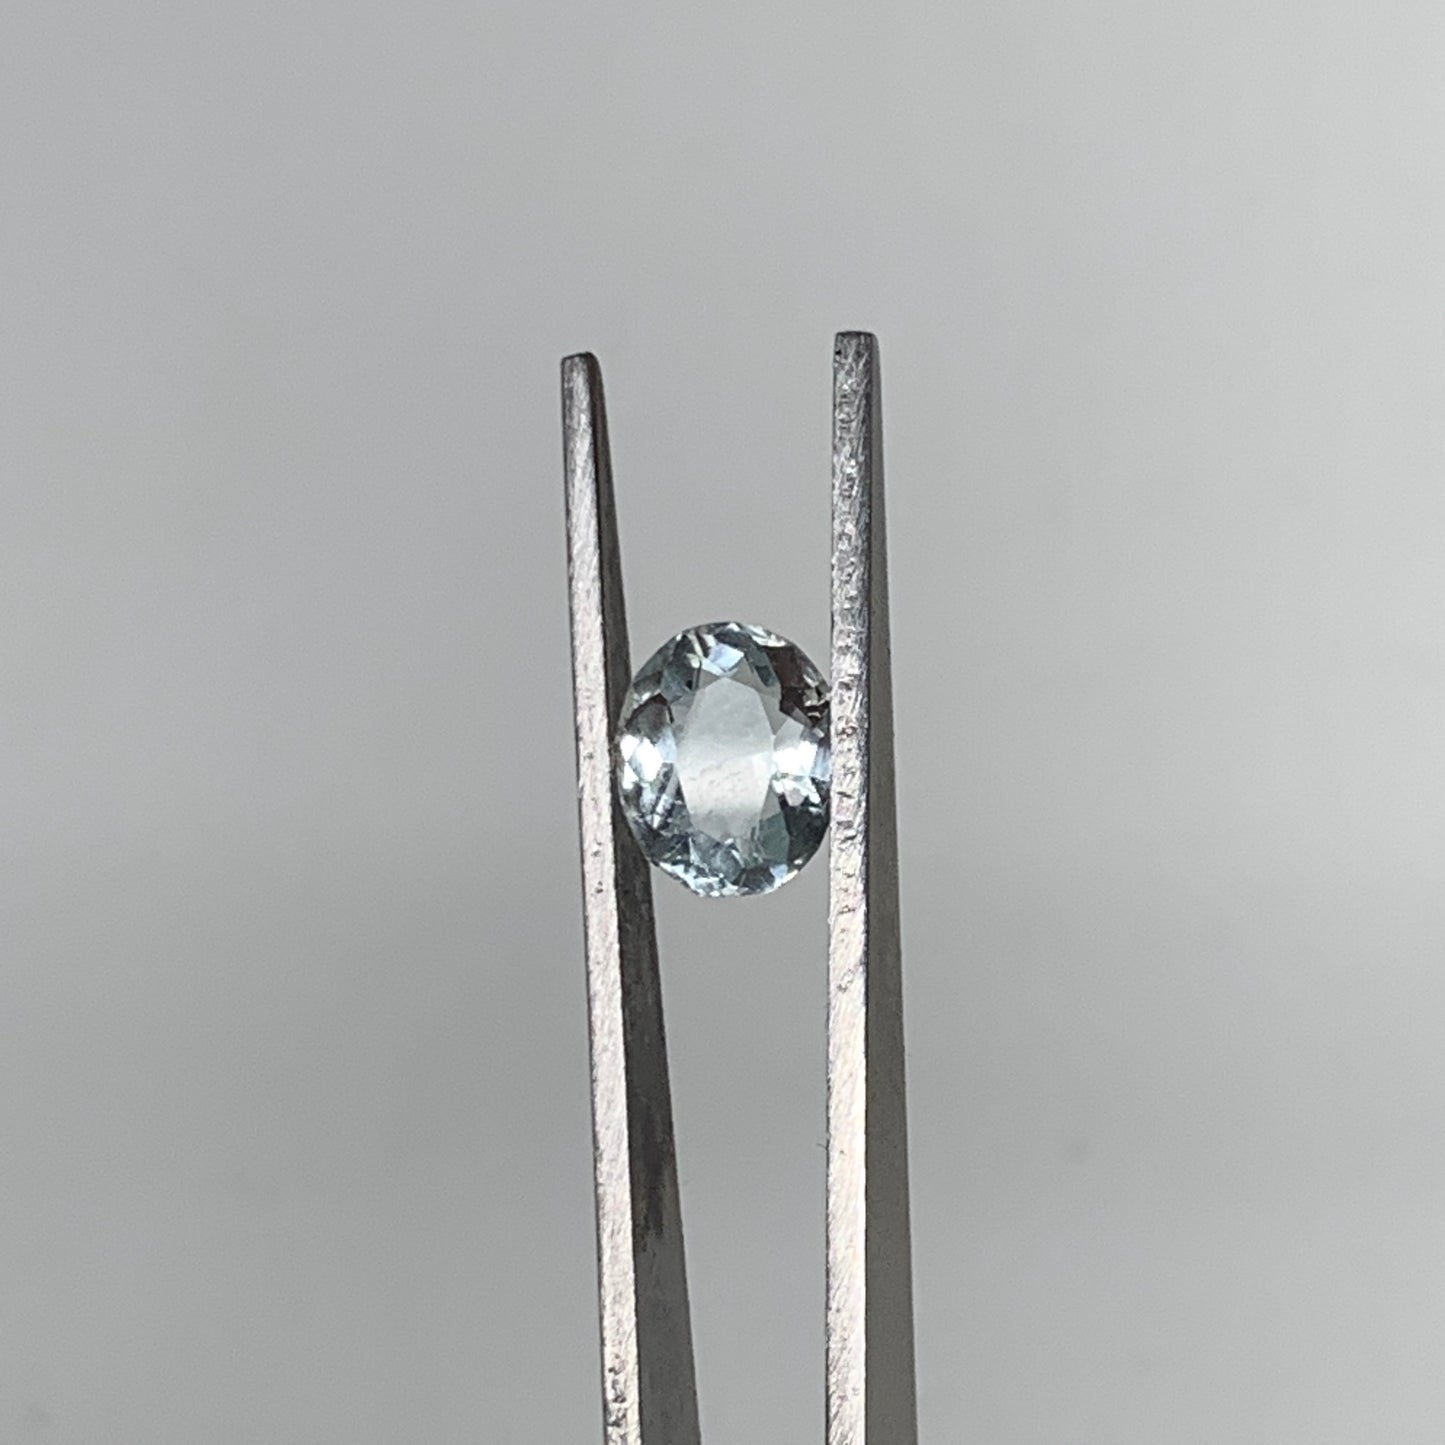 1.43cts, 8mmx7mmx4mm, Aquamarine Crystal Facetted Stone Loose @Pakistan,CTS124